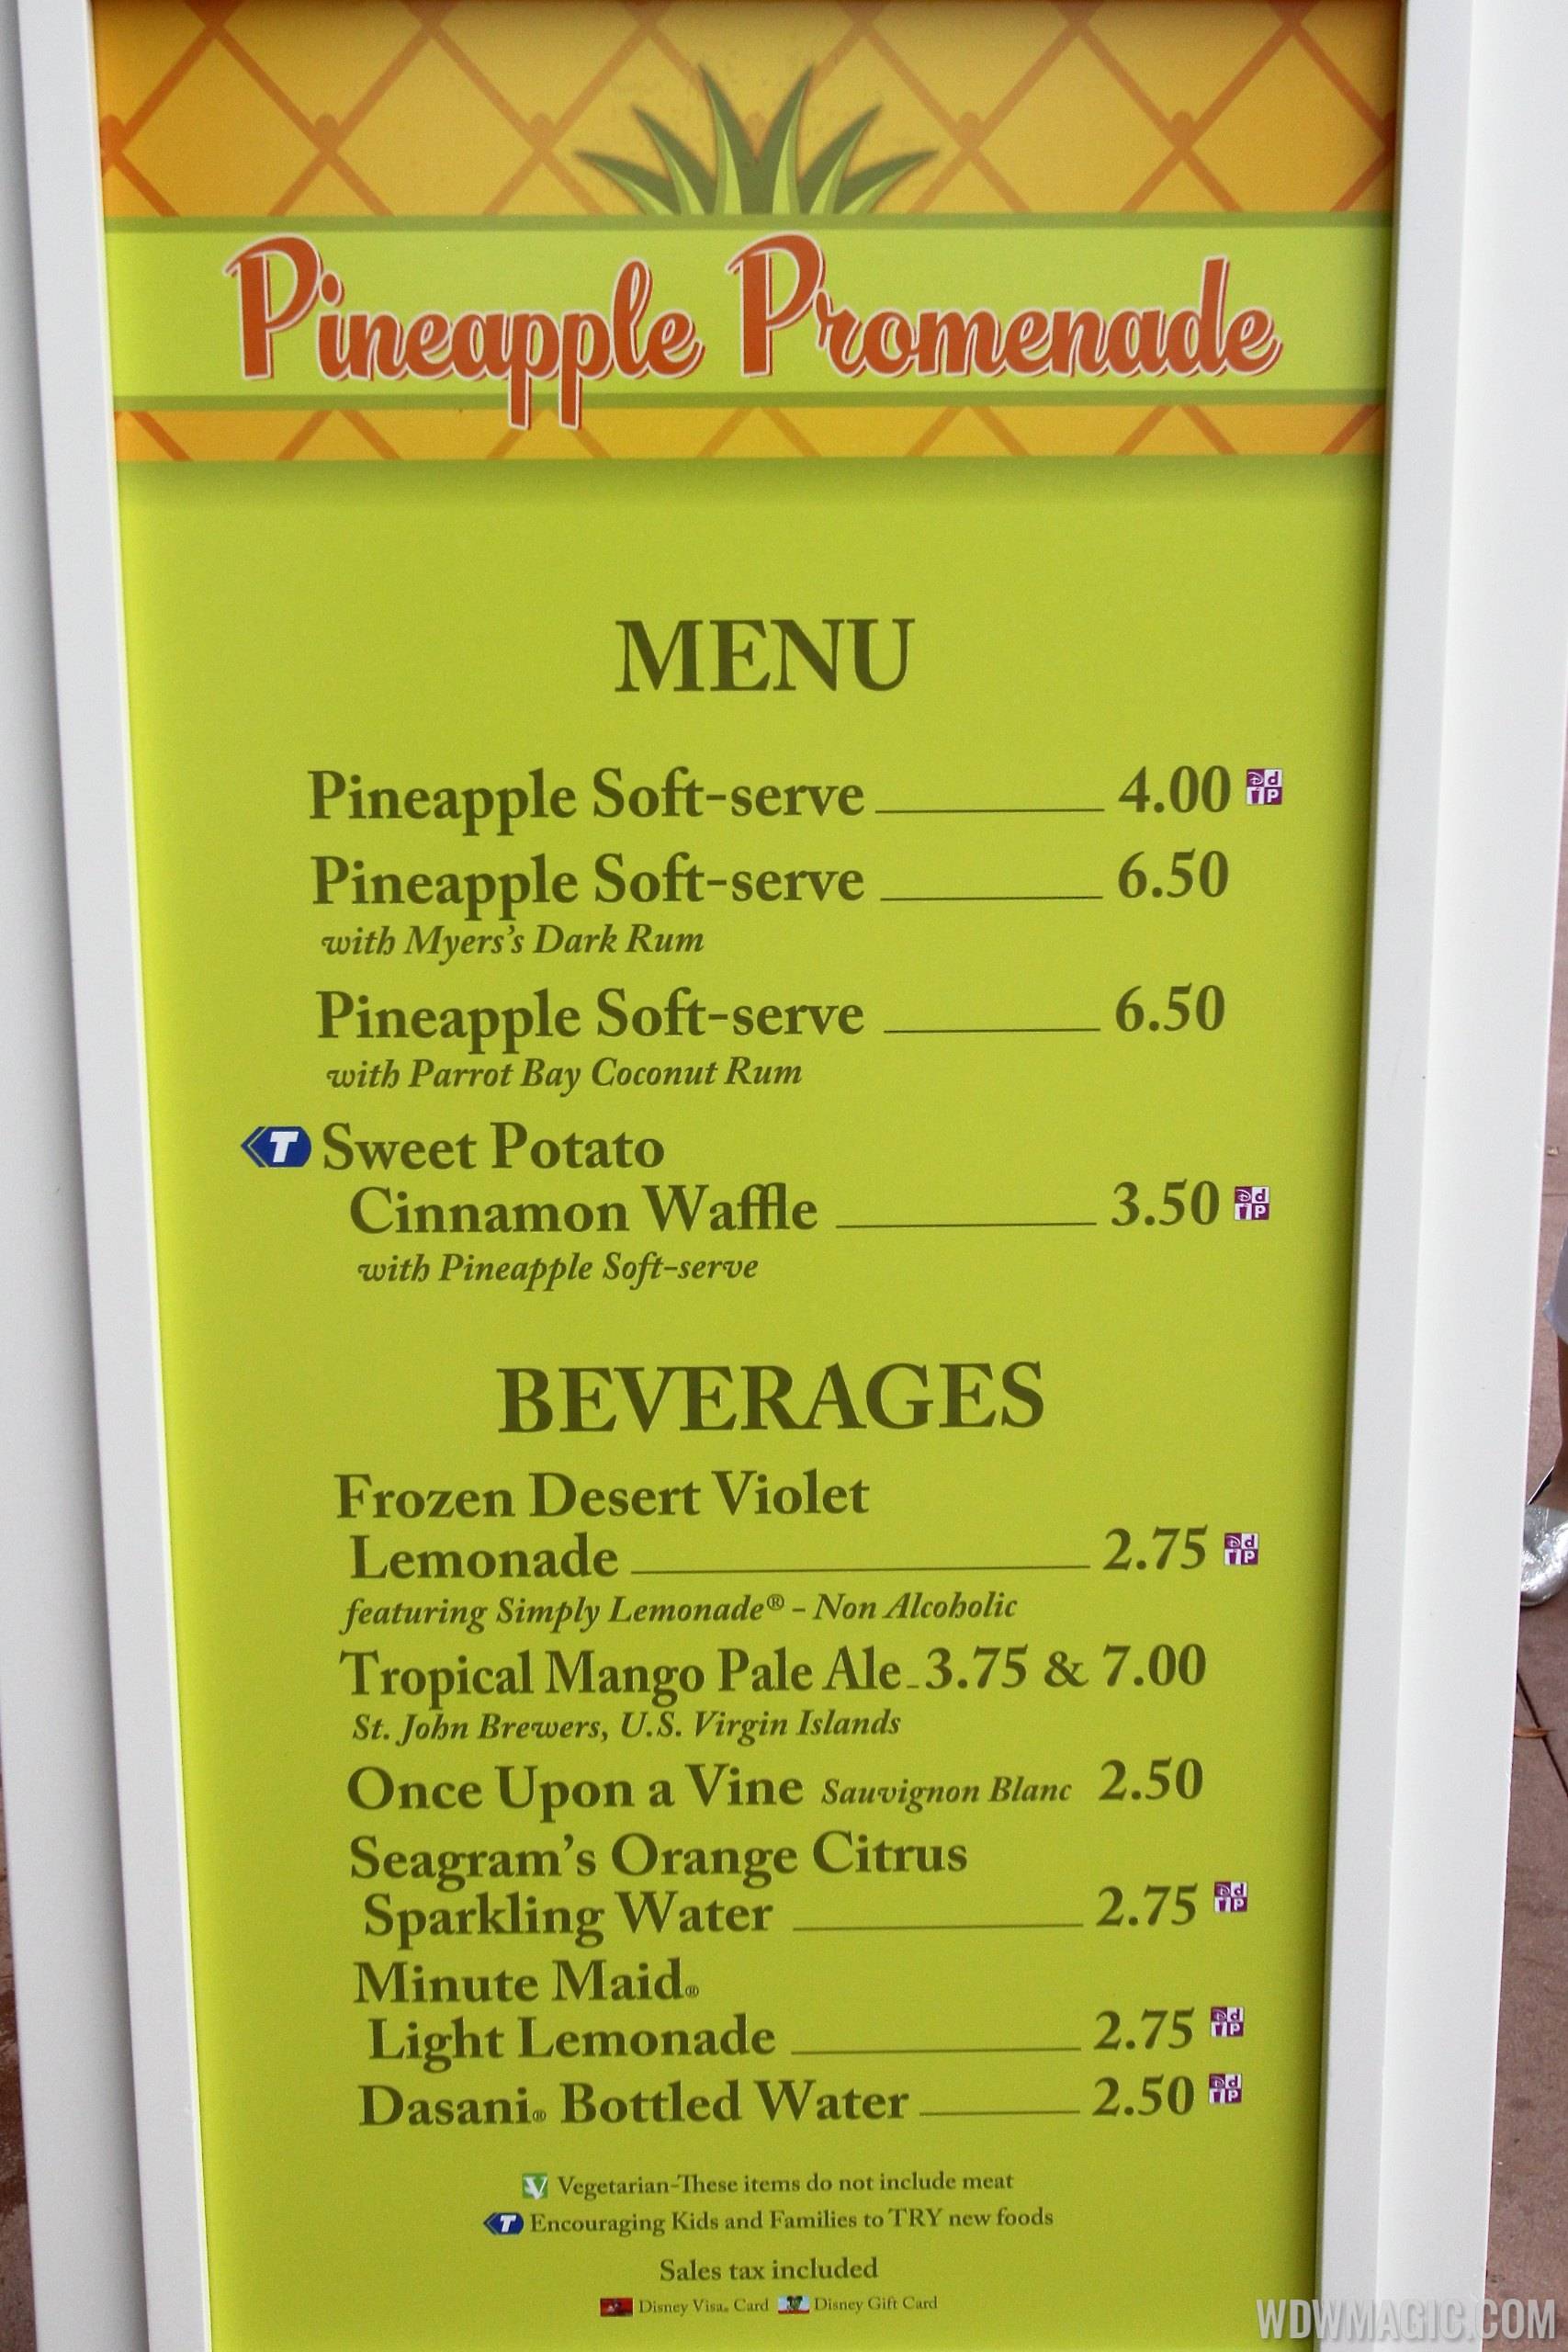 PHOTOS - 2014 Epcot Flower and Garden Festival Outdoor Kitchens menus and pricing